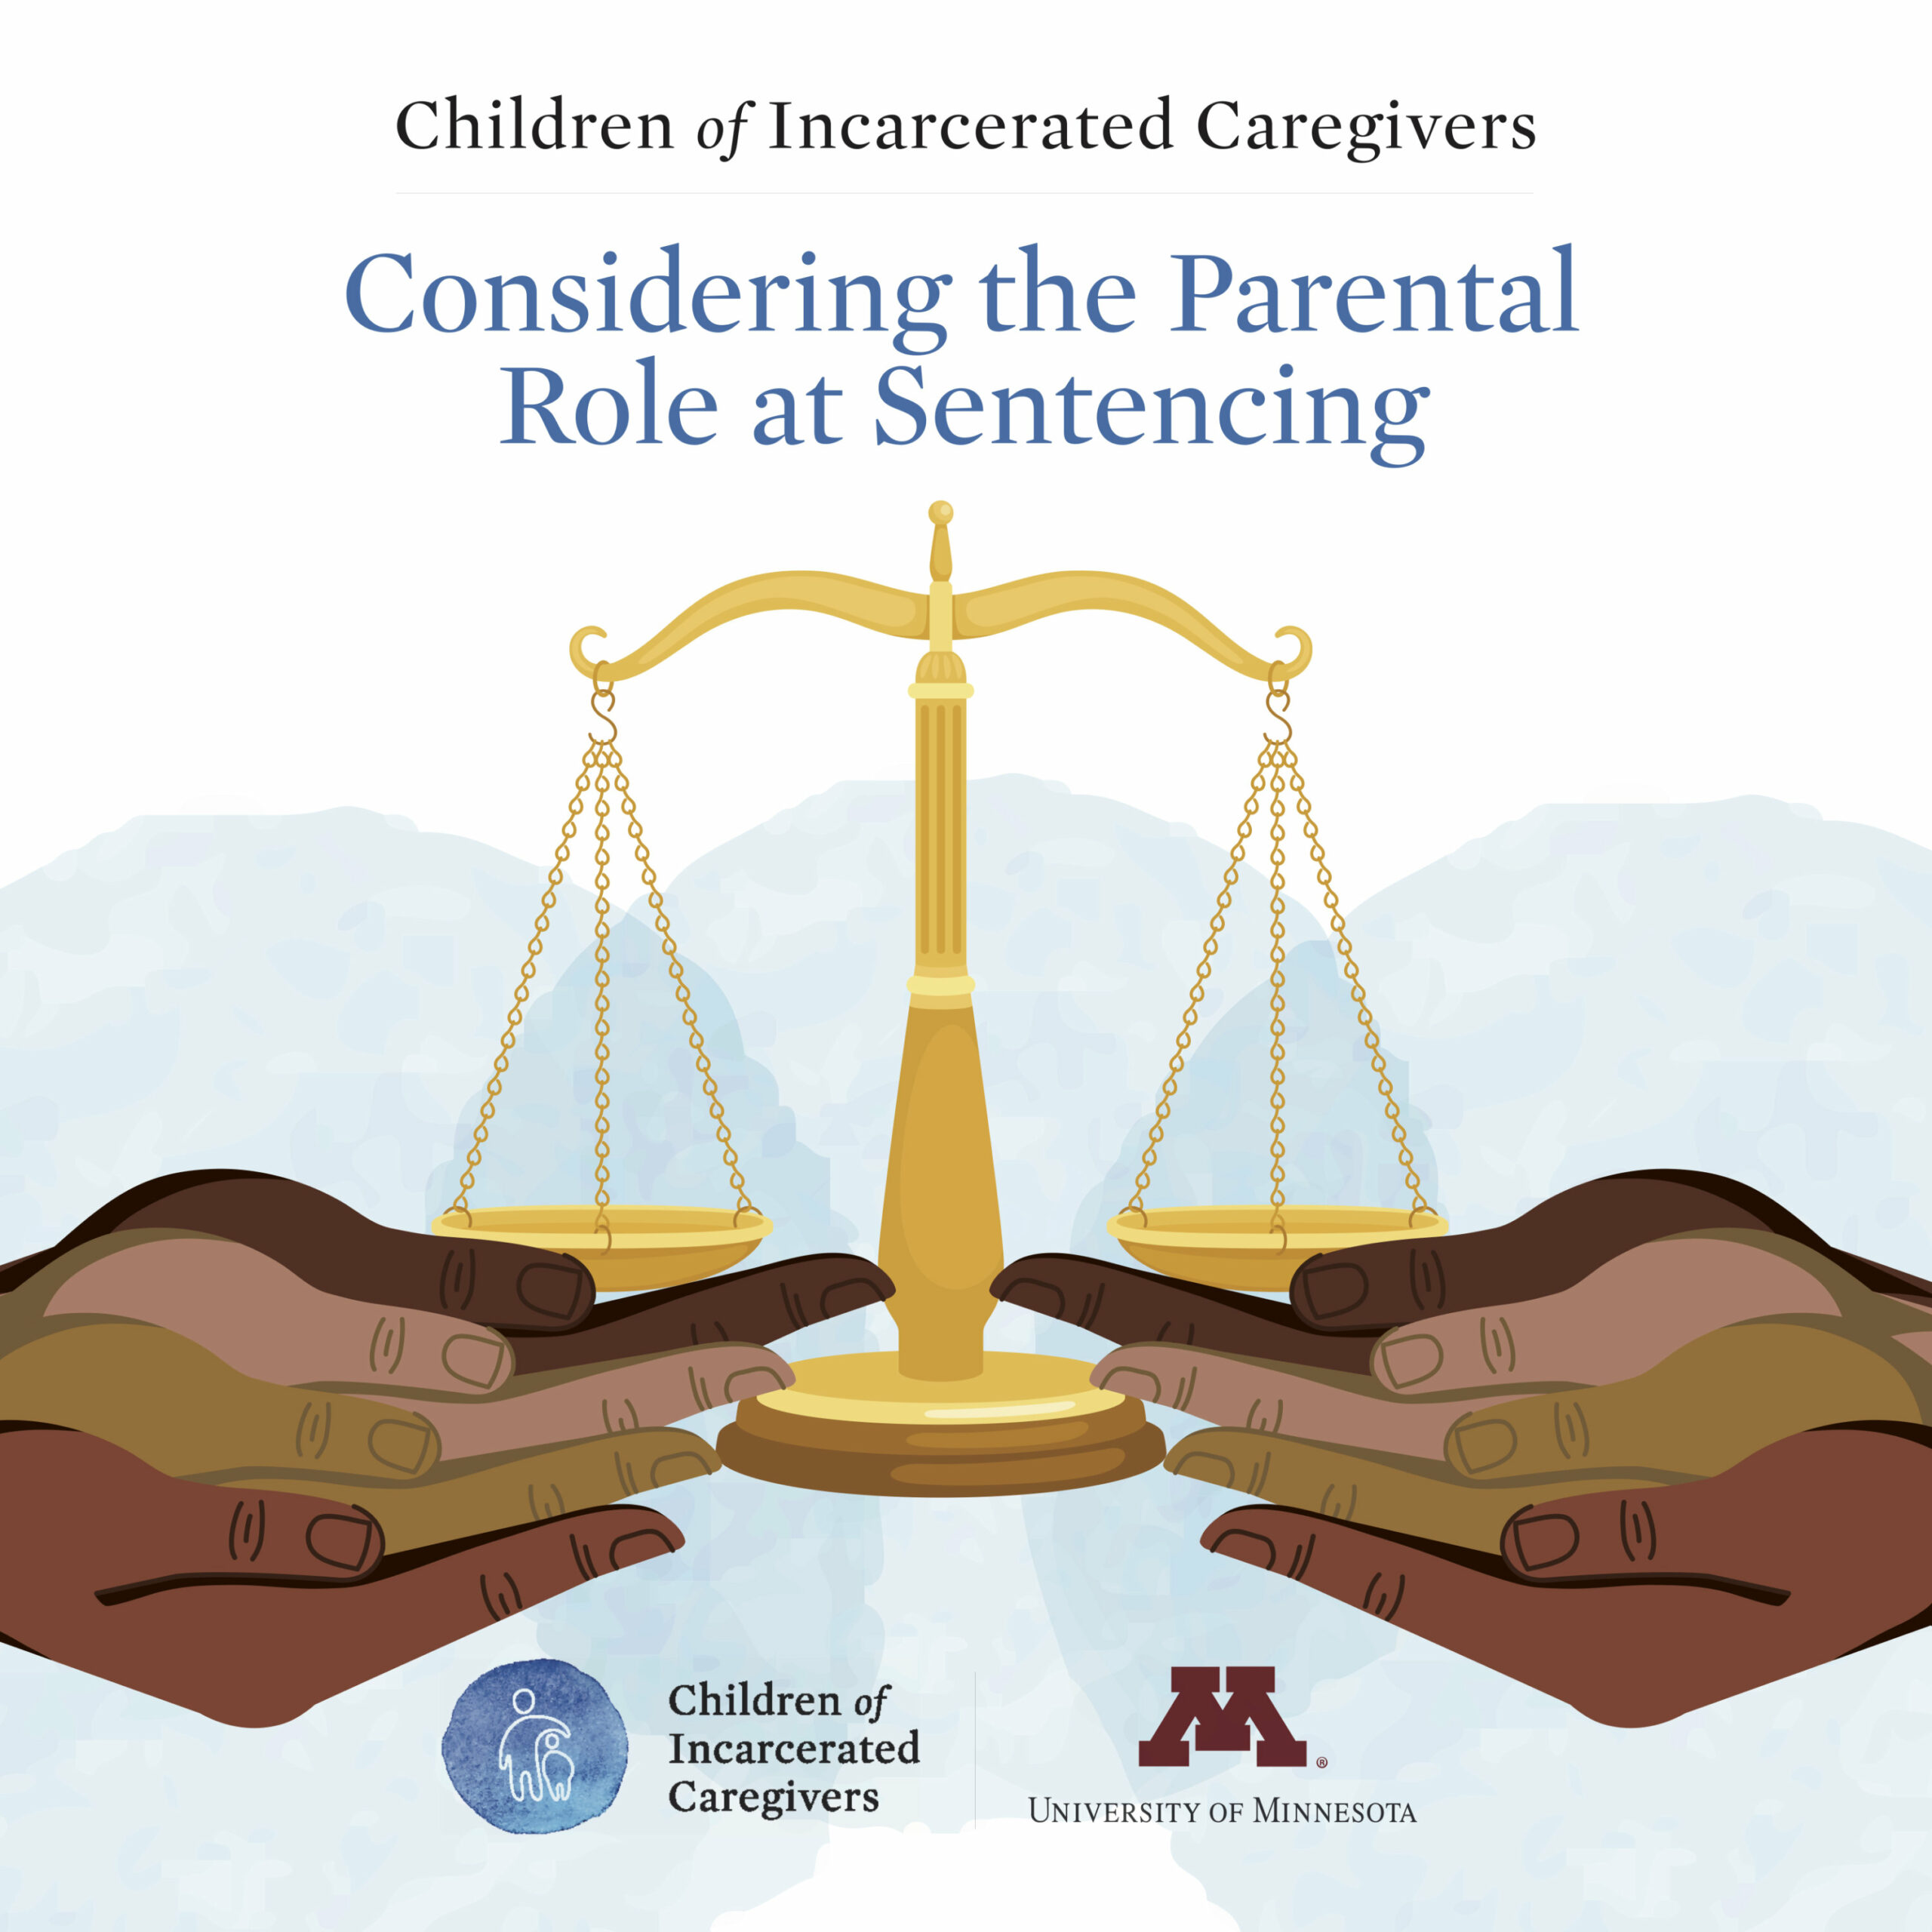 Considering the Parental Role at Sentencing